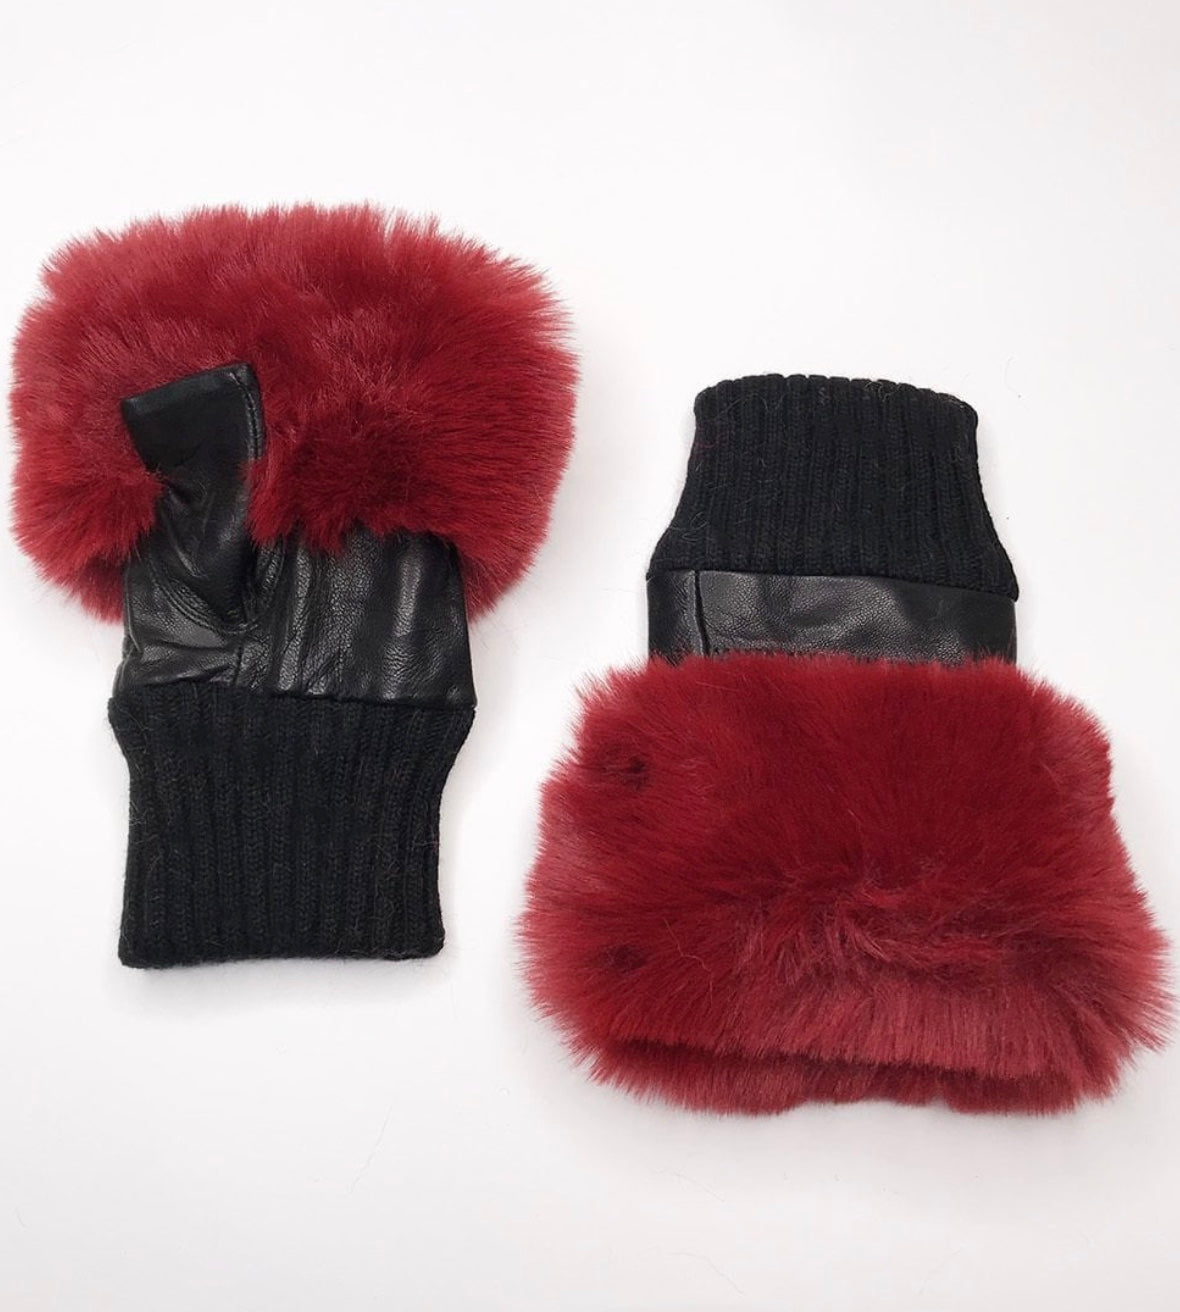 Fingerless Gloves with faux fur